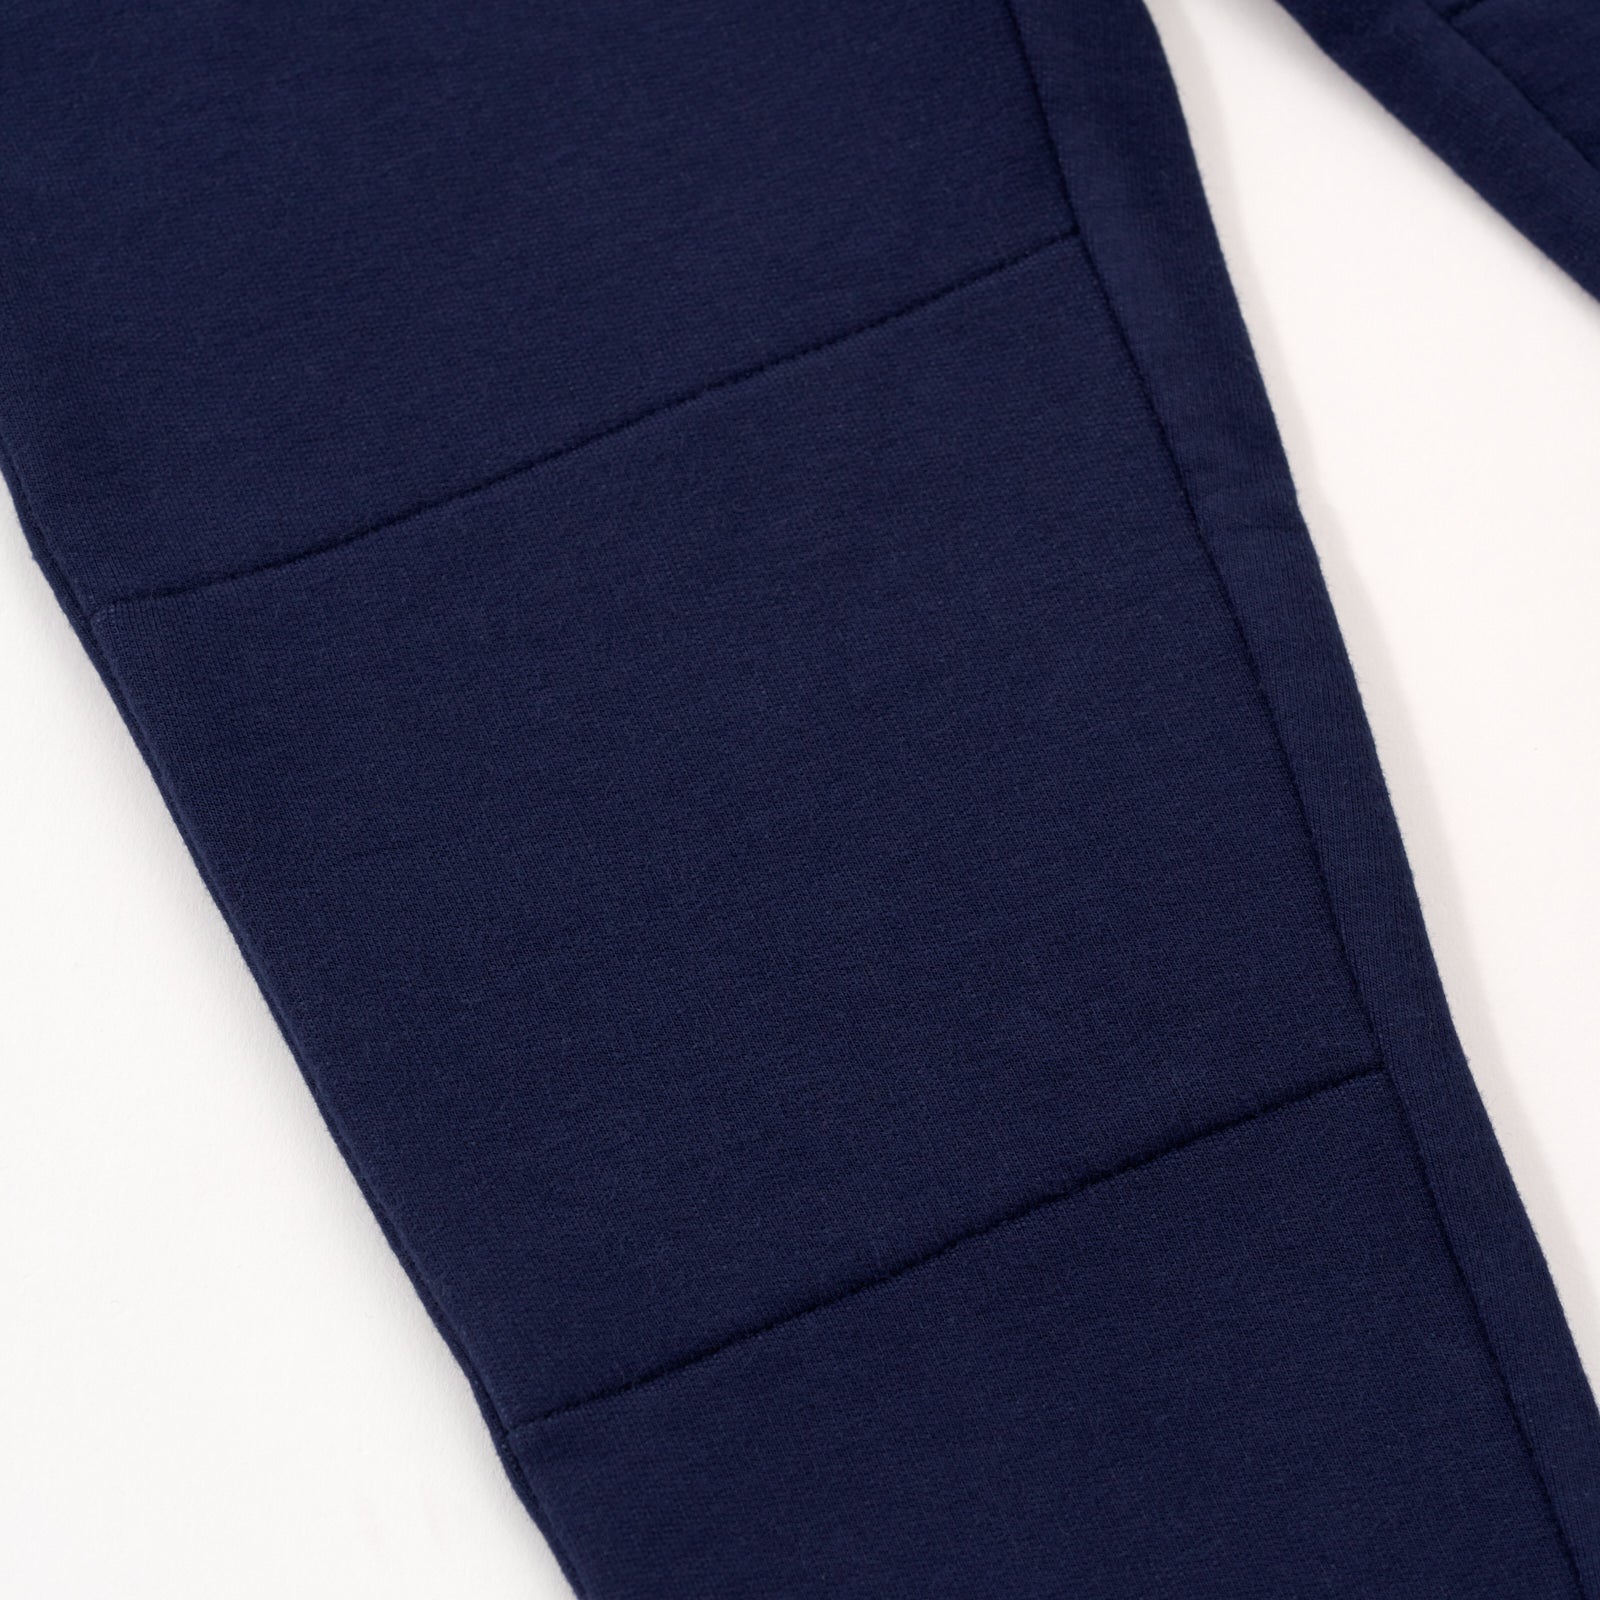 Close up knee detail image of the Classic Navy Jogger